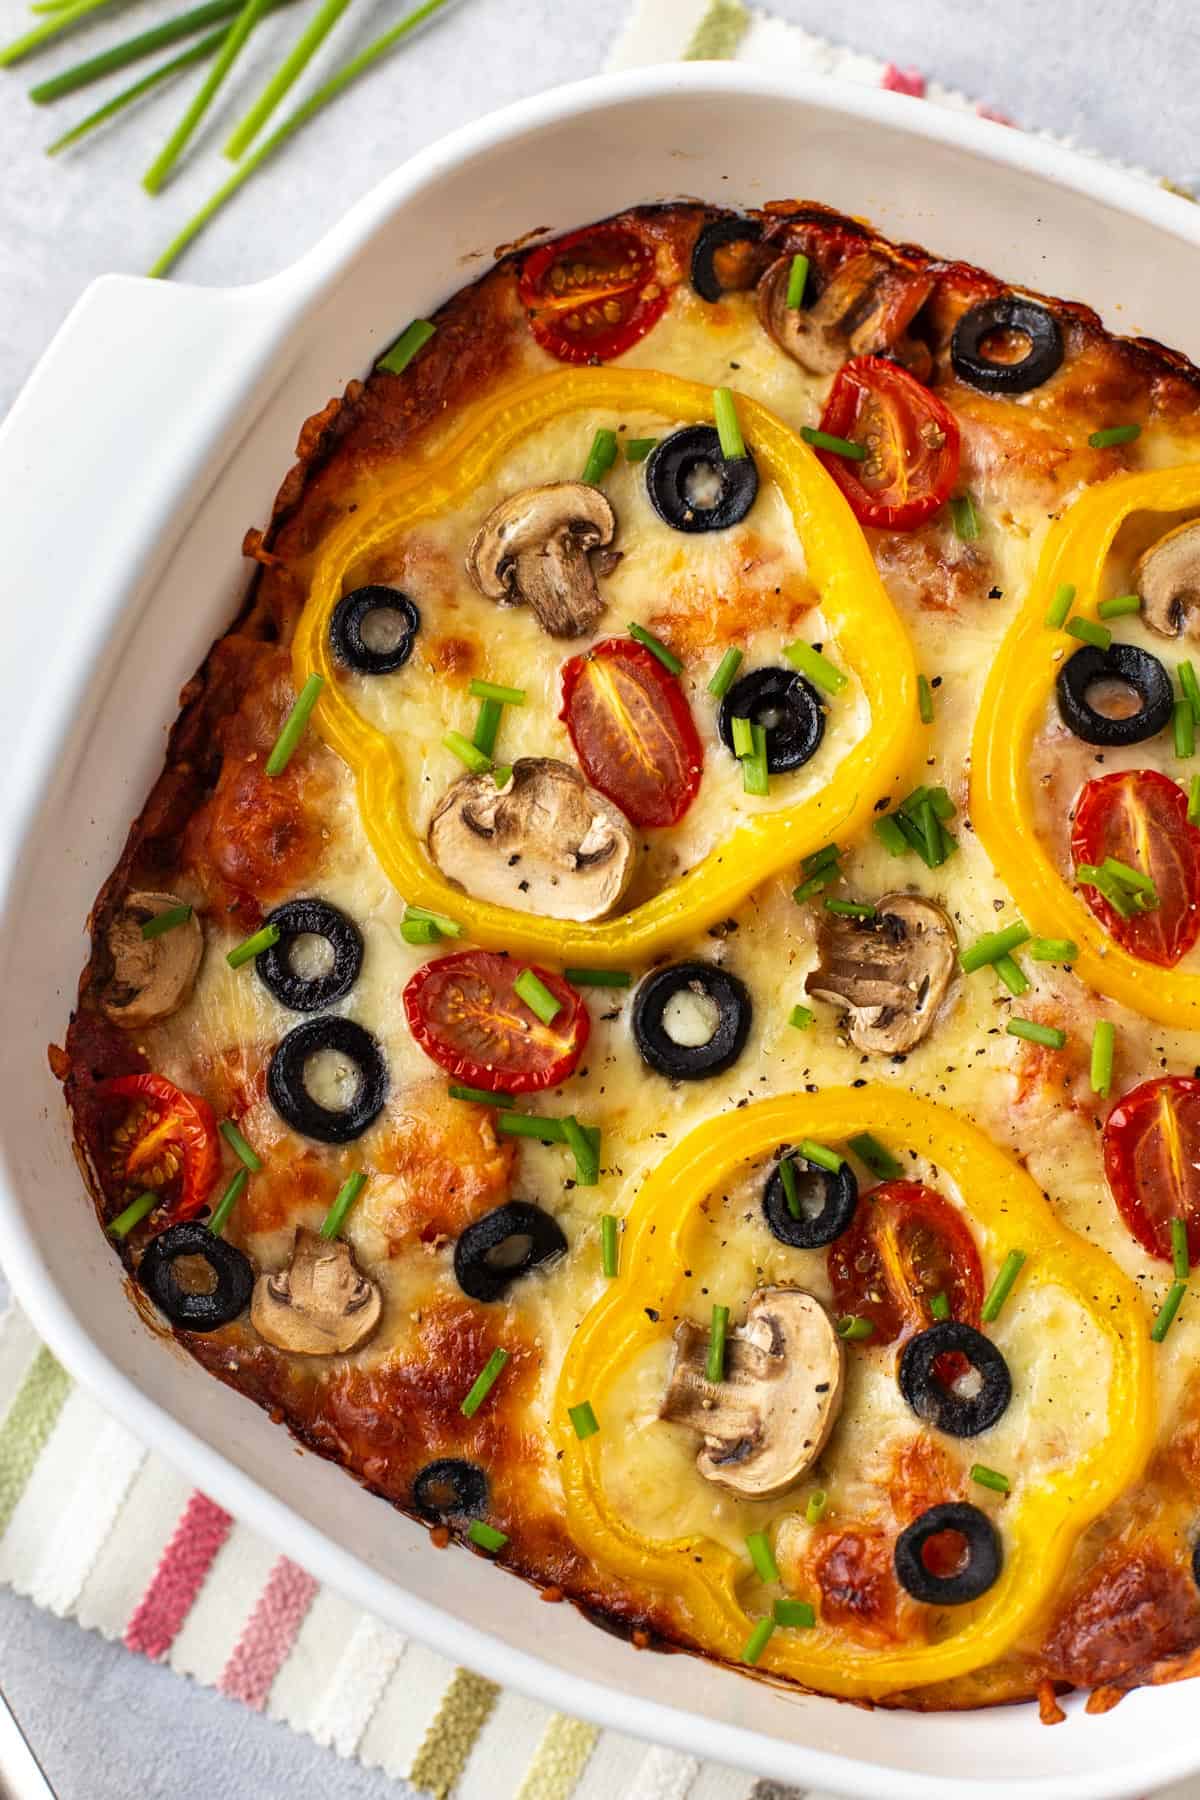 Gooey pizza baked gnocchi in a dish, topped with peppers, mushrooms and olives.